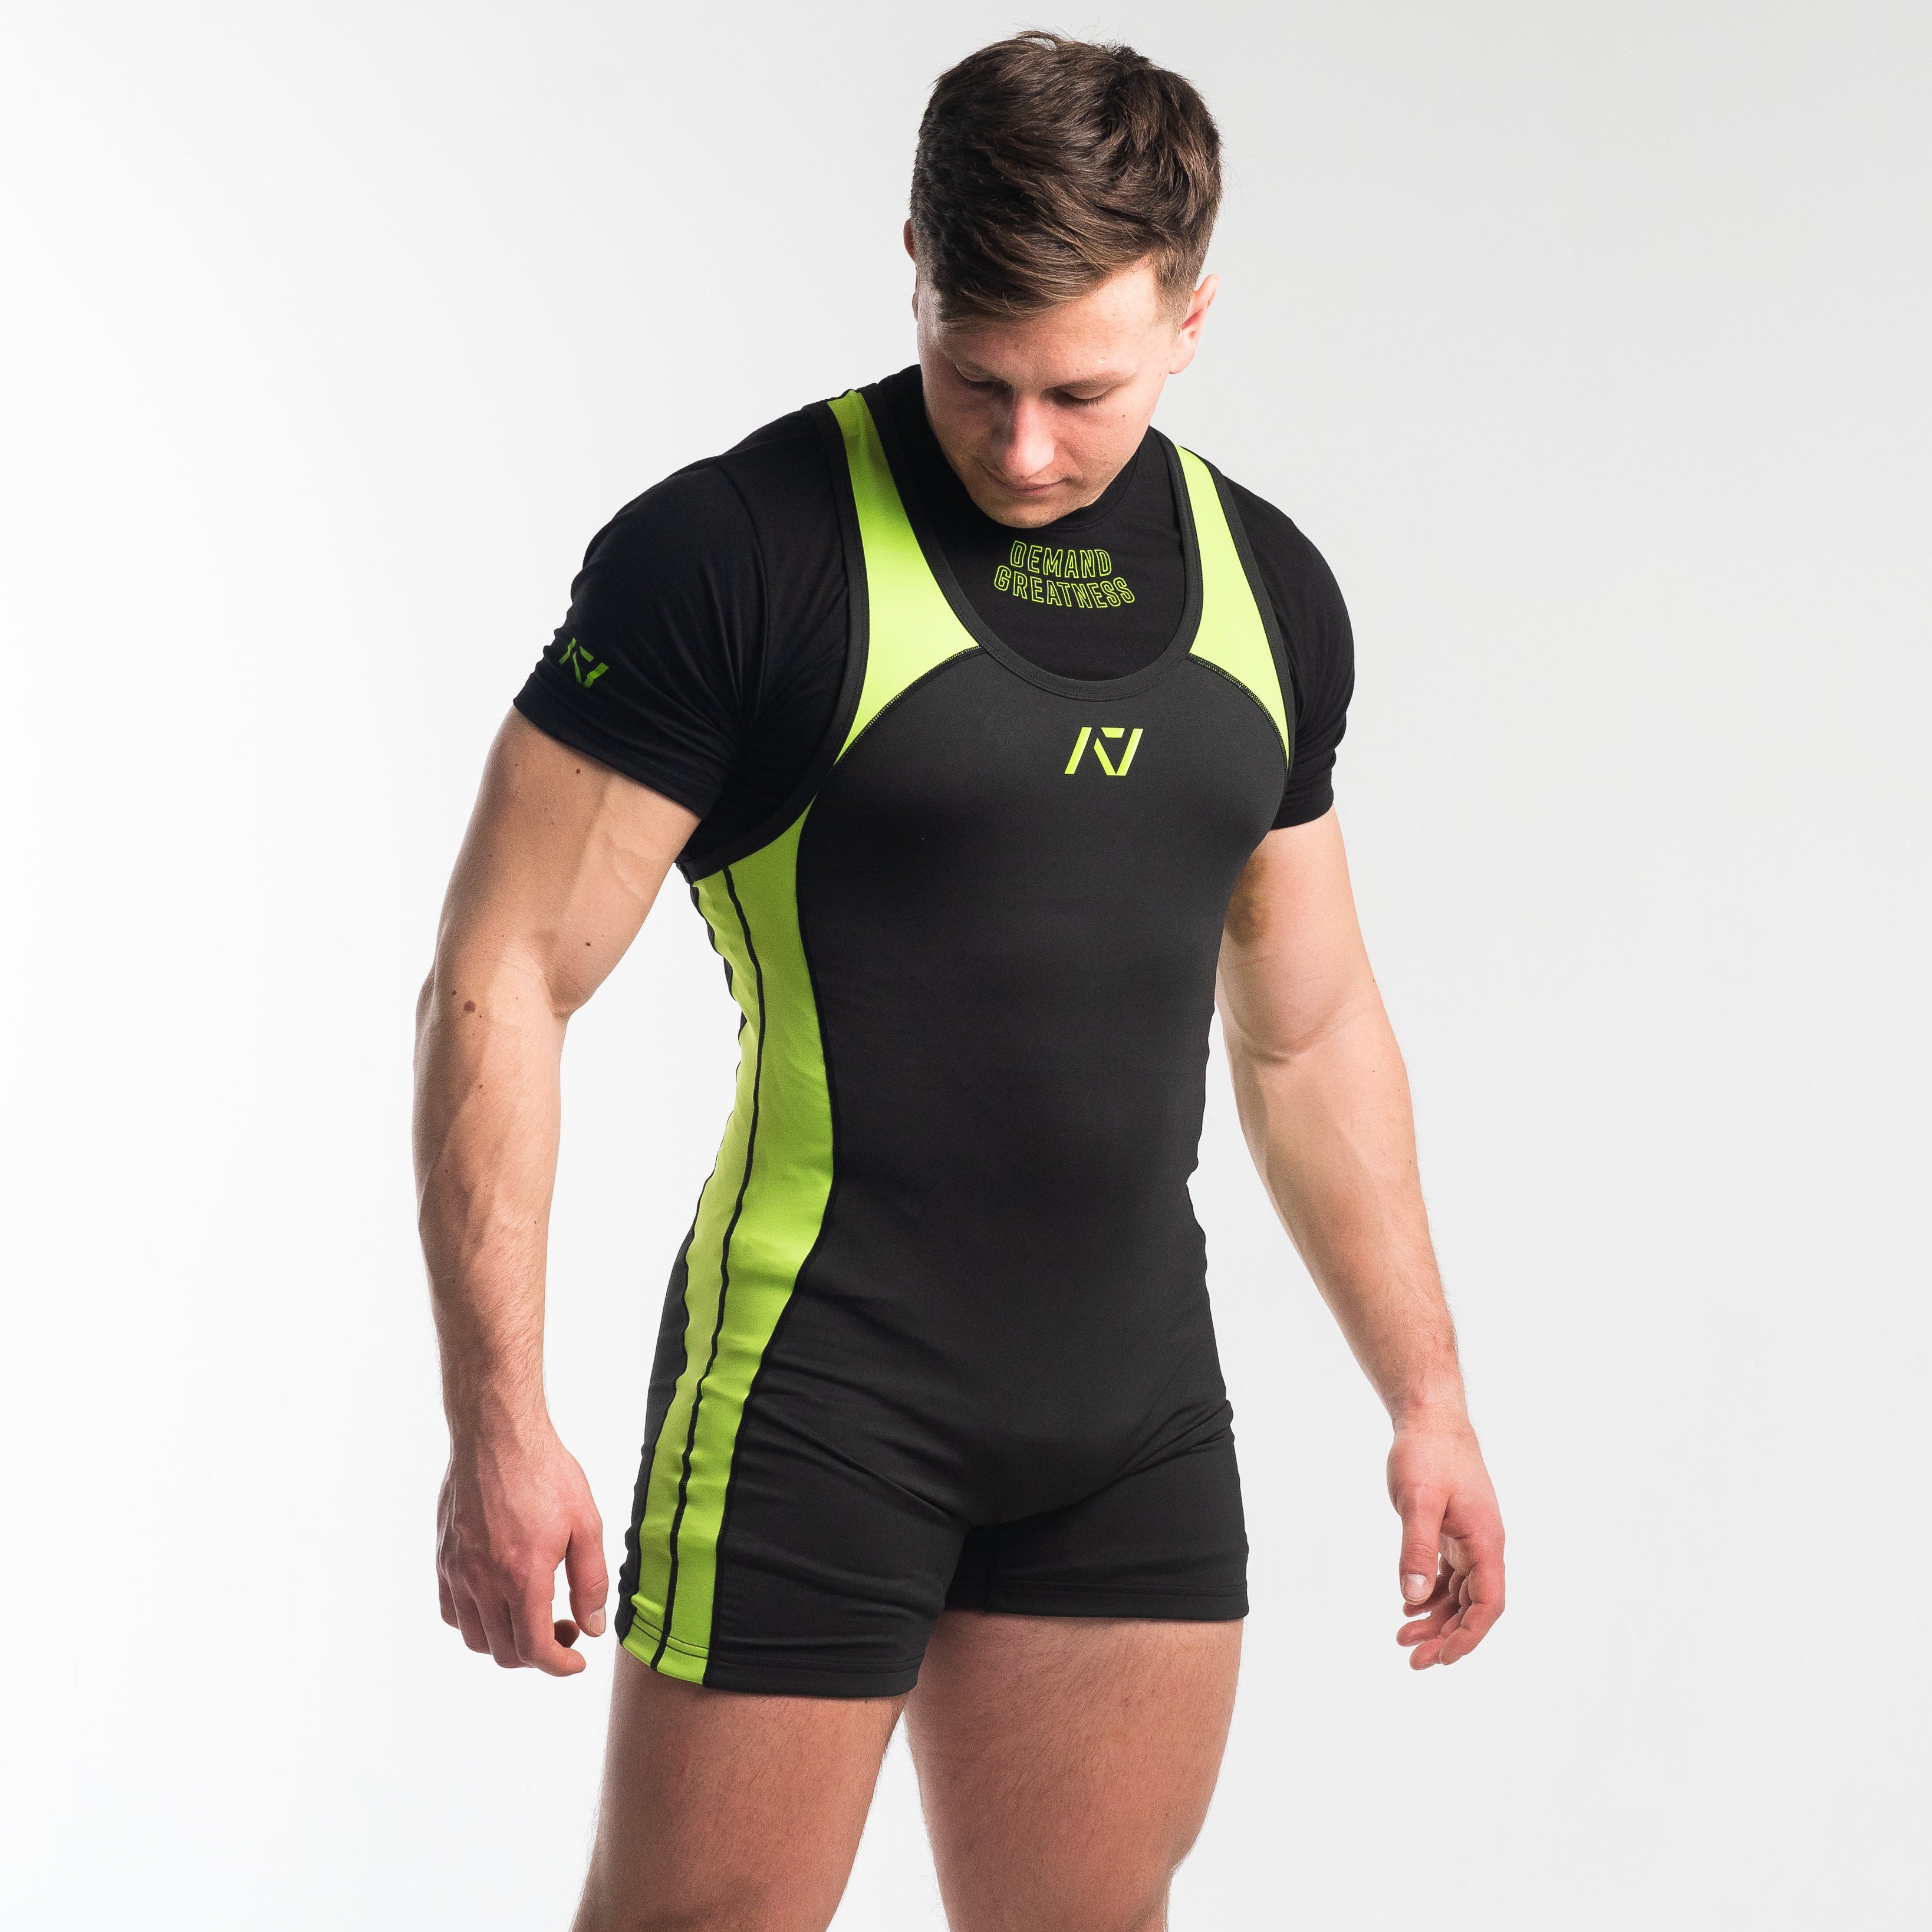 A7 IPF Approved Alien Luno singlet features extra lat mobility, side panel stitching to guide the squat depth level and curved panel design for a slimming look. The Women's cut singlet features a tapered waist and additional quad room. The IPF Approved Kit includes Alien Luno Powerlifting Singlet, A7 Meet Shirt, A7 Deadlift Socks, Hourglass Knee Sleeves (Stiff Knee Sleeves and Rigor Mortis Knee Sleeves). All A7 Powerlifting Equipment shipping to UK, Norway, Switzerland and Iceland.